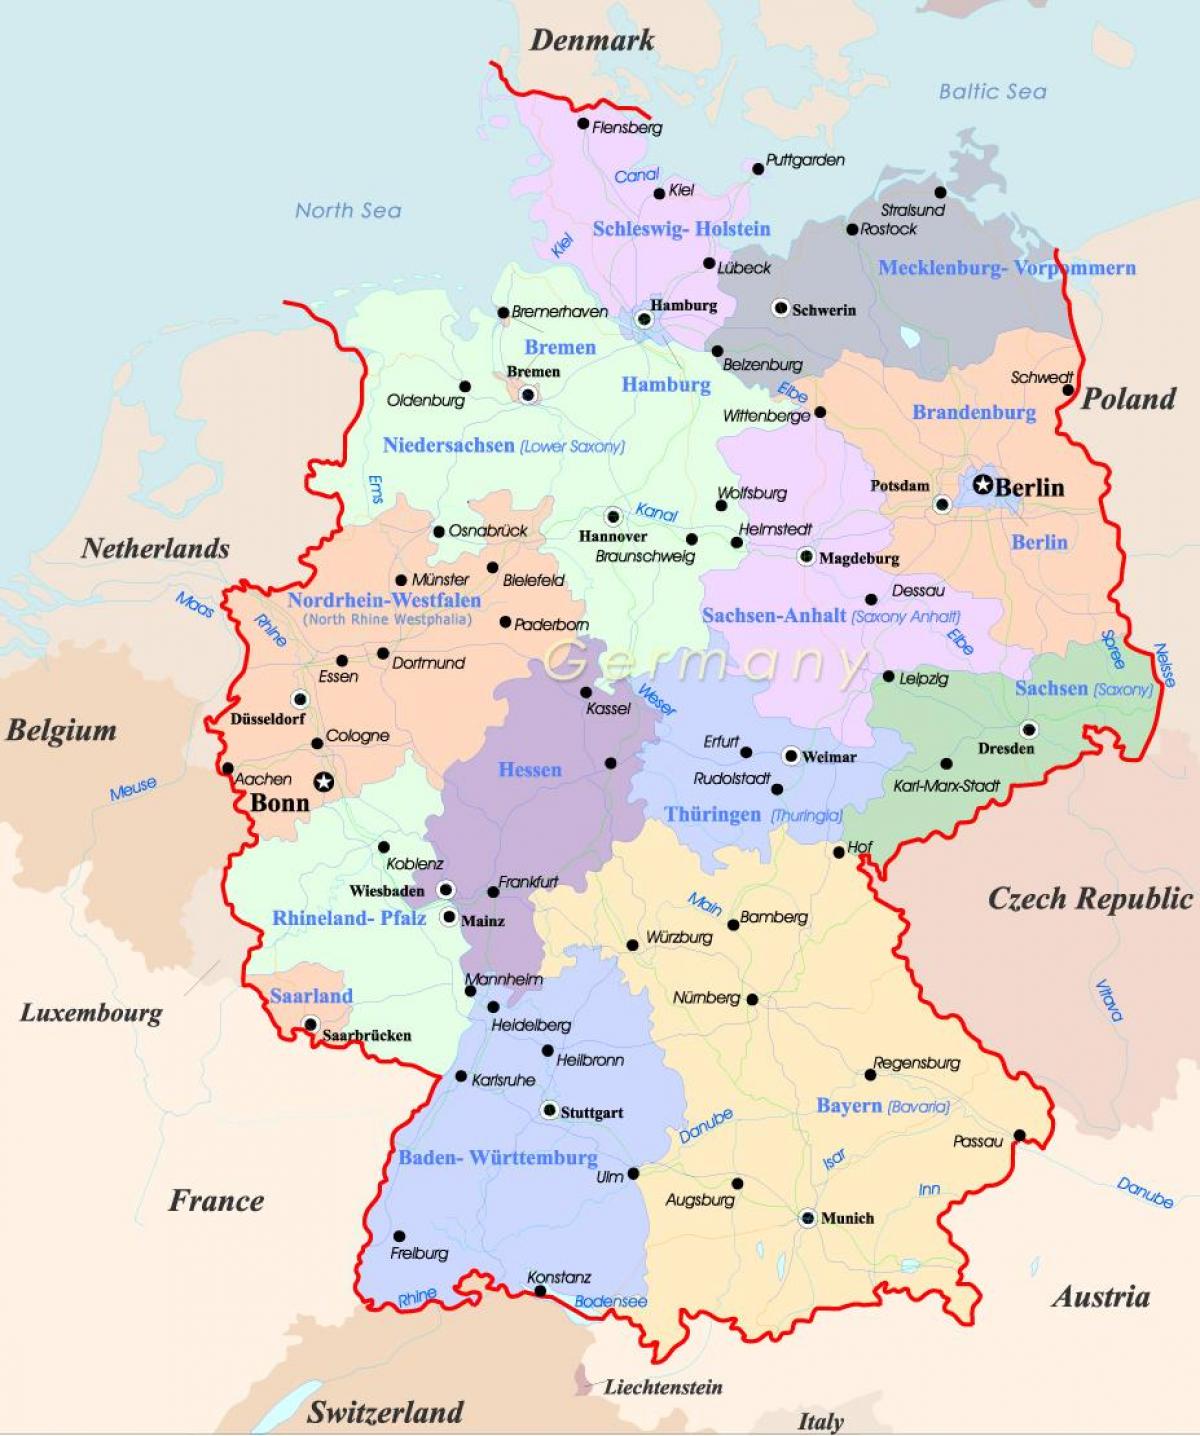 Germany on a map